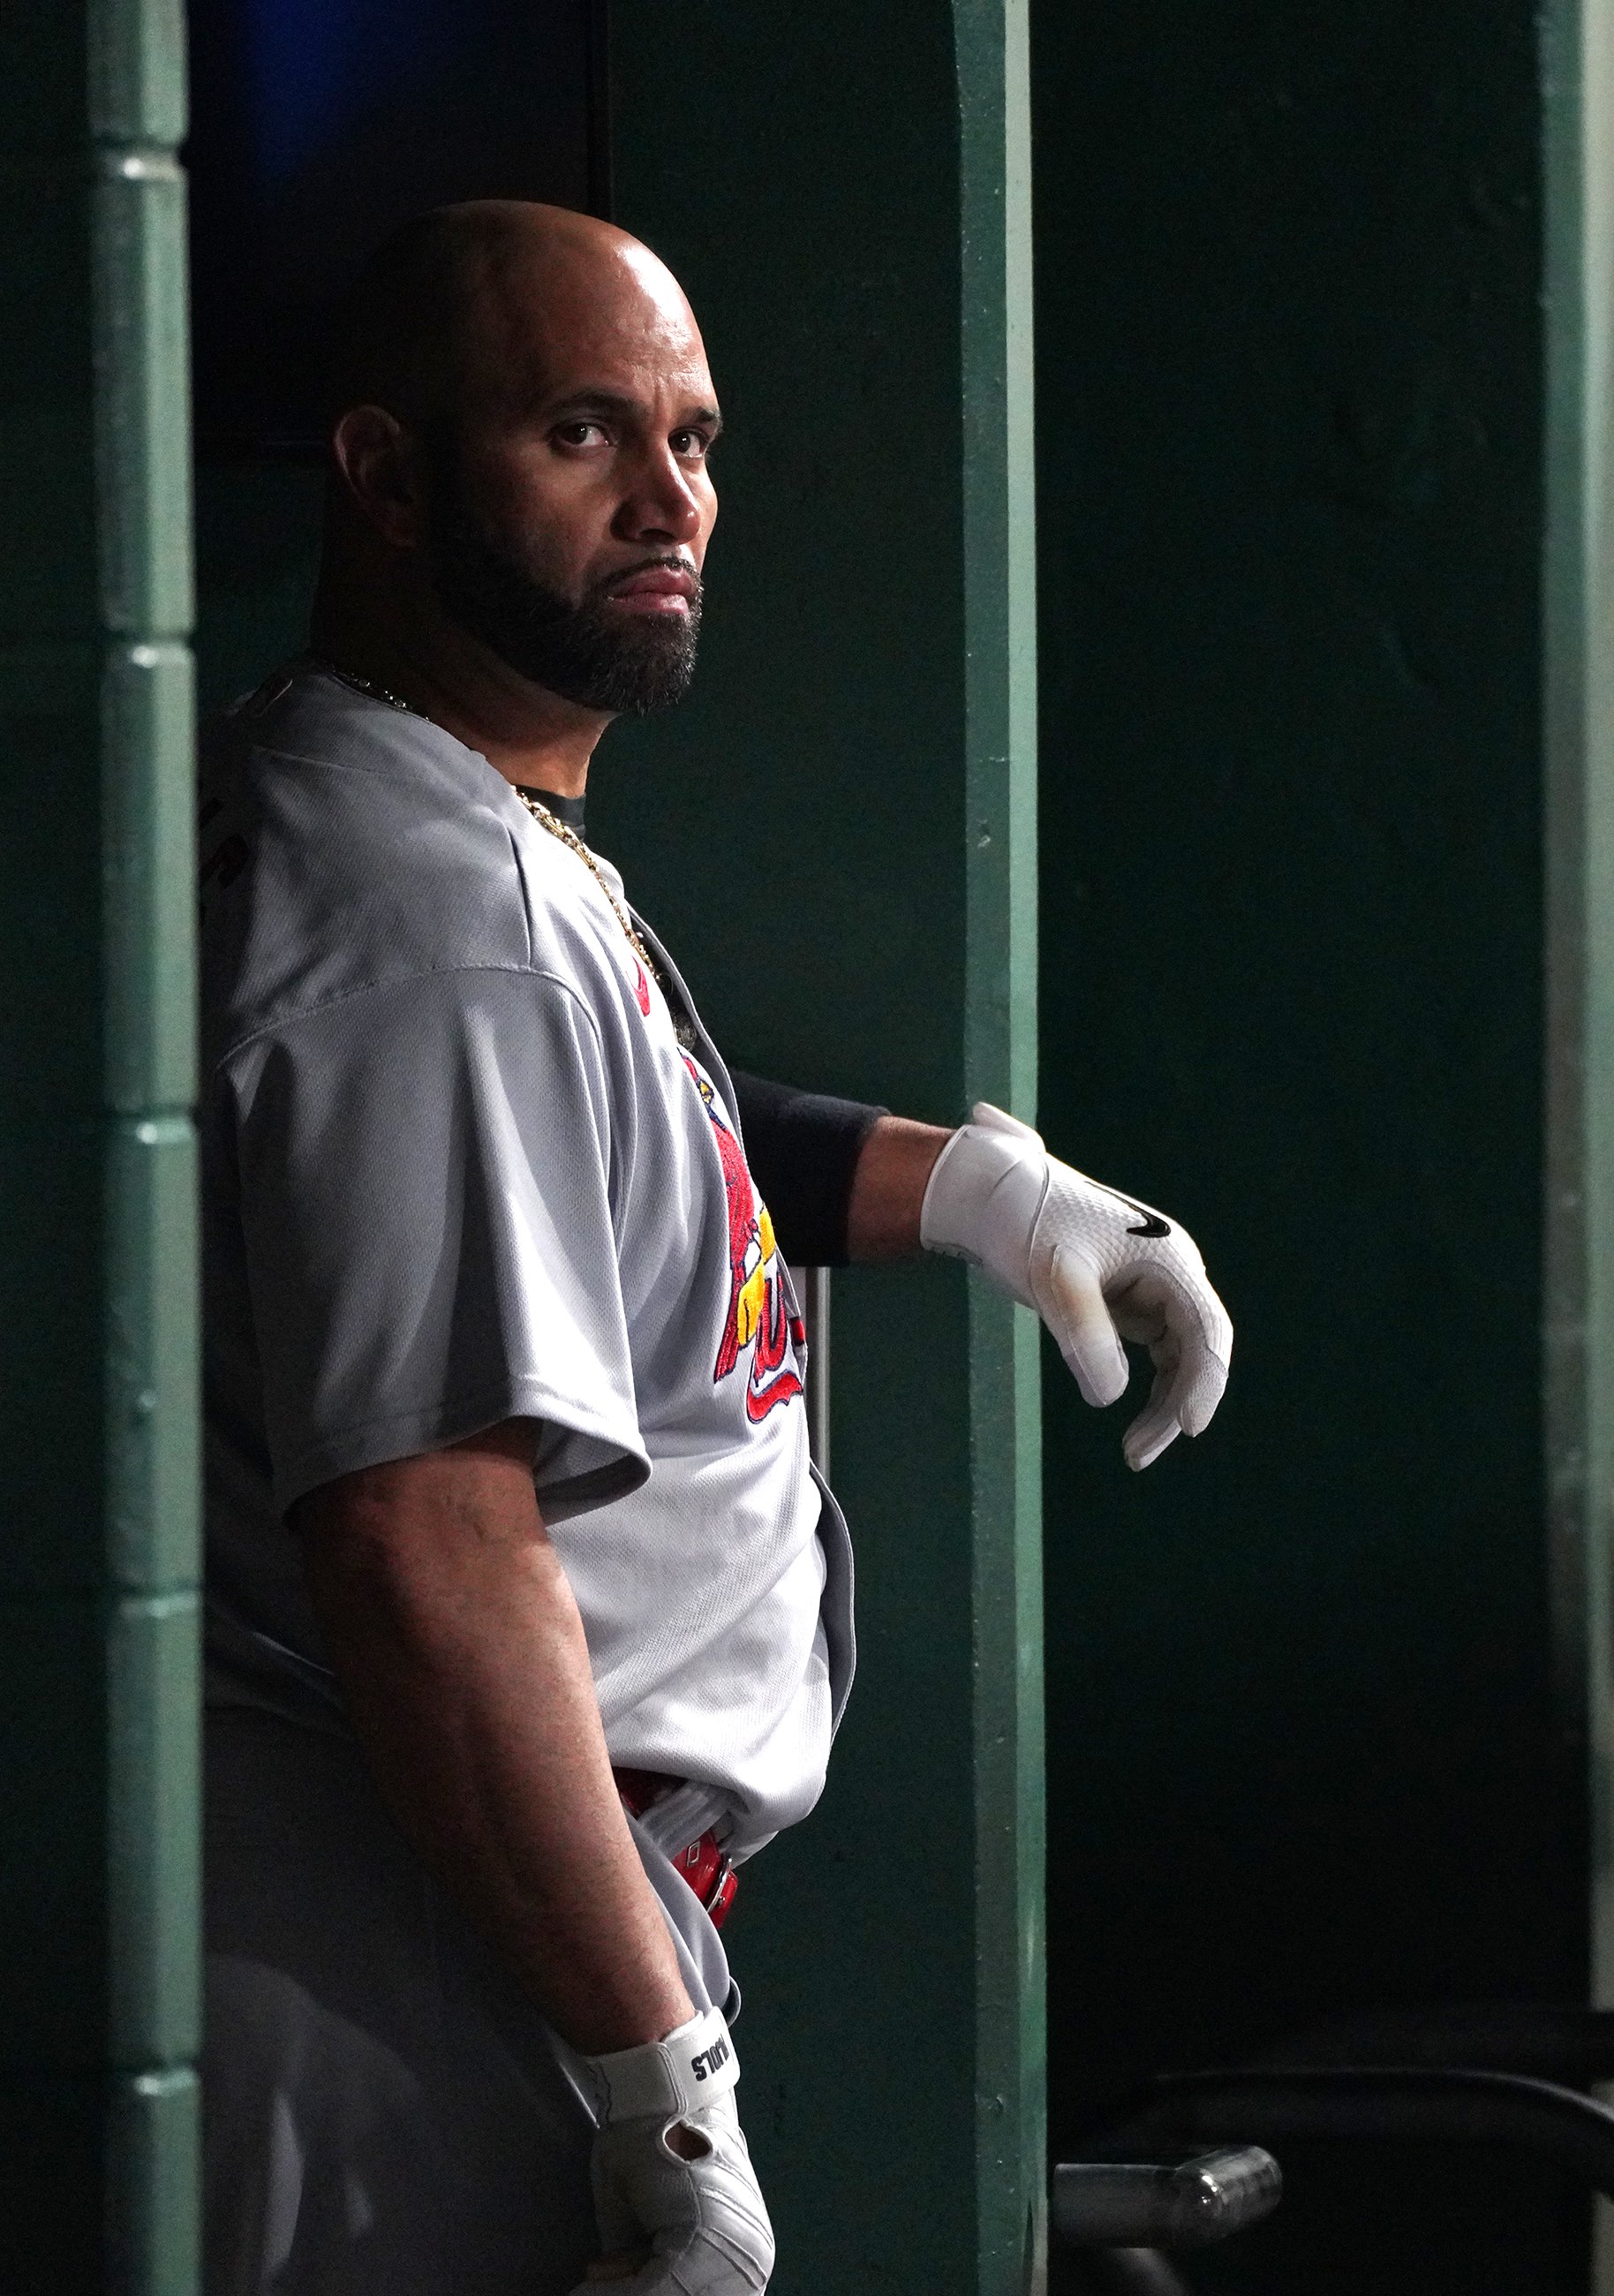  The Cardinals' Albert Pujols stands in the dugout before hitting his 703rd home run and 2,216th RBI, passing Babe Ruth for the second-most RBIs, during his team's game against the Pirates on Monday, October 3, 2022, at PNC Park in Pittsburgh.  (Emil